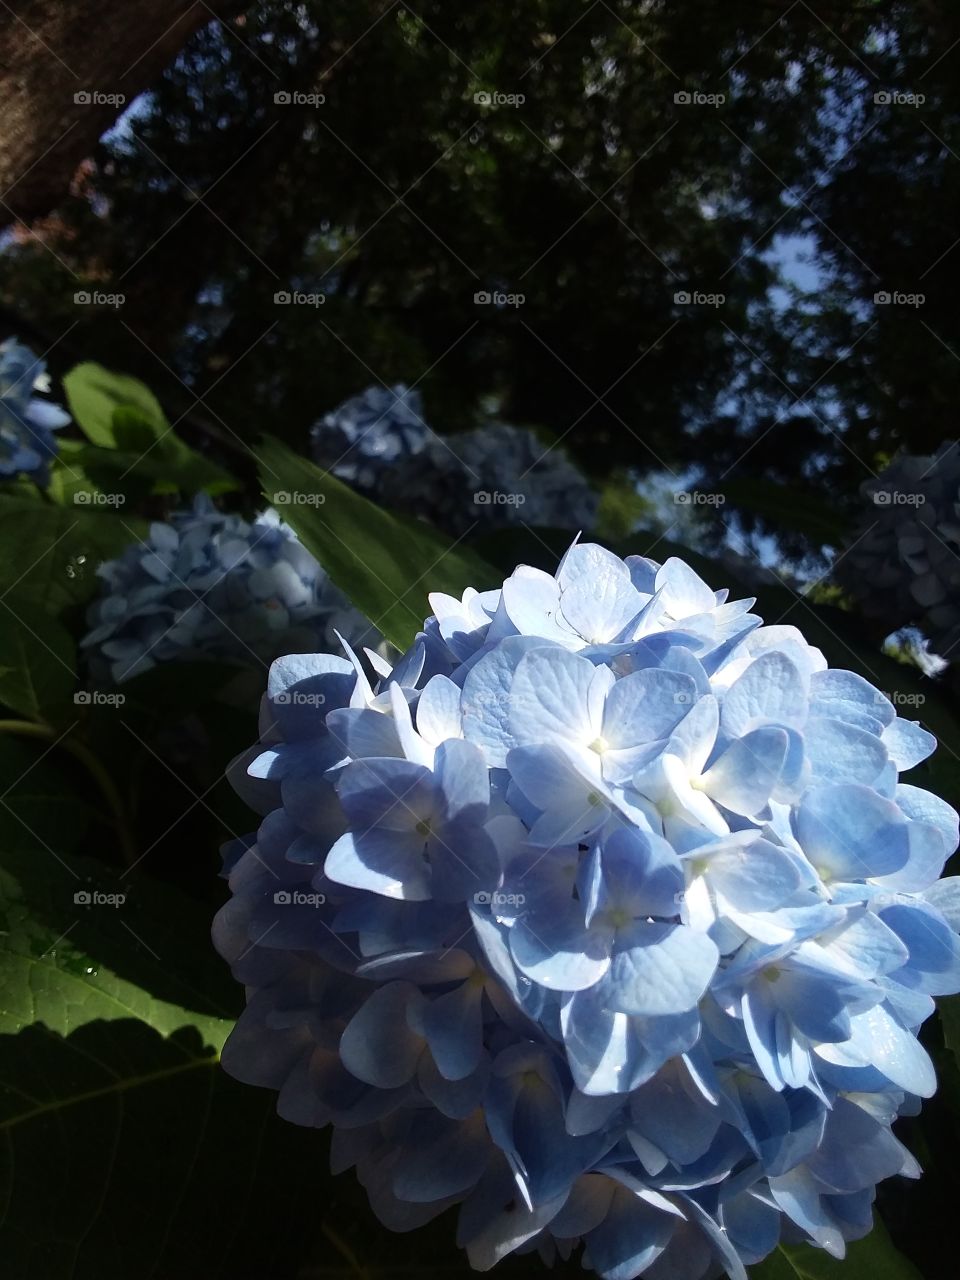 late afternoon shadows cast on the Hydrangea